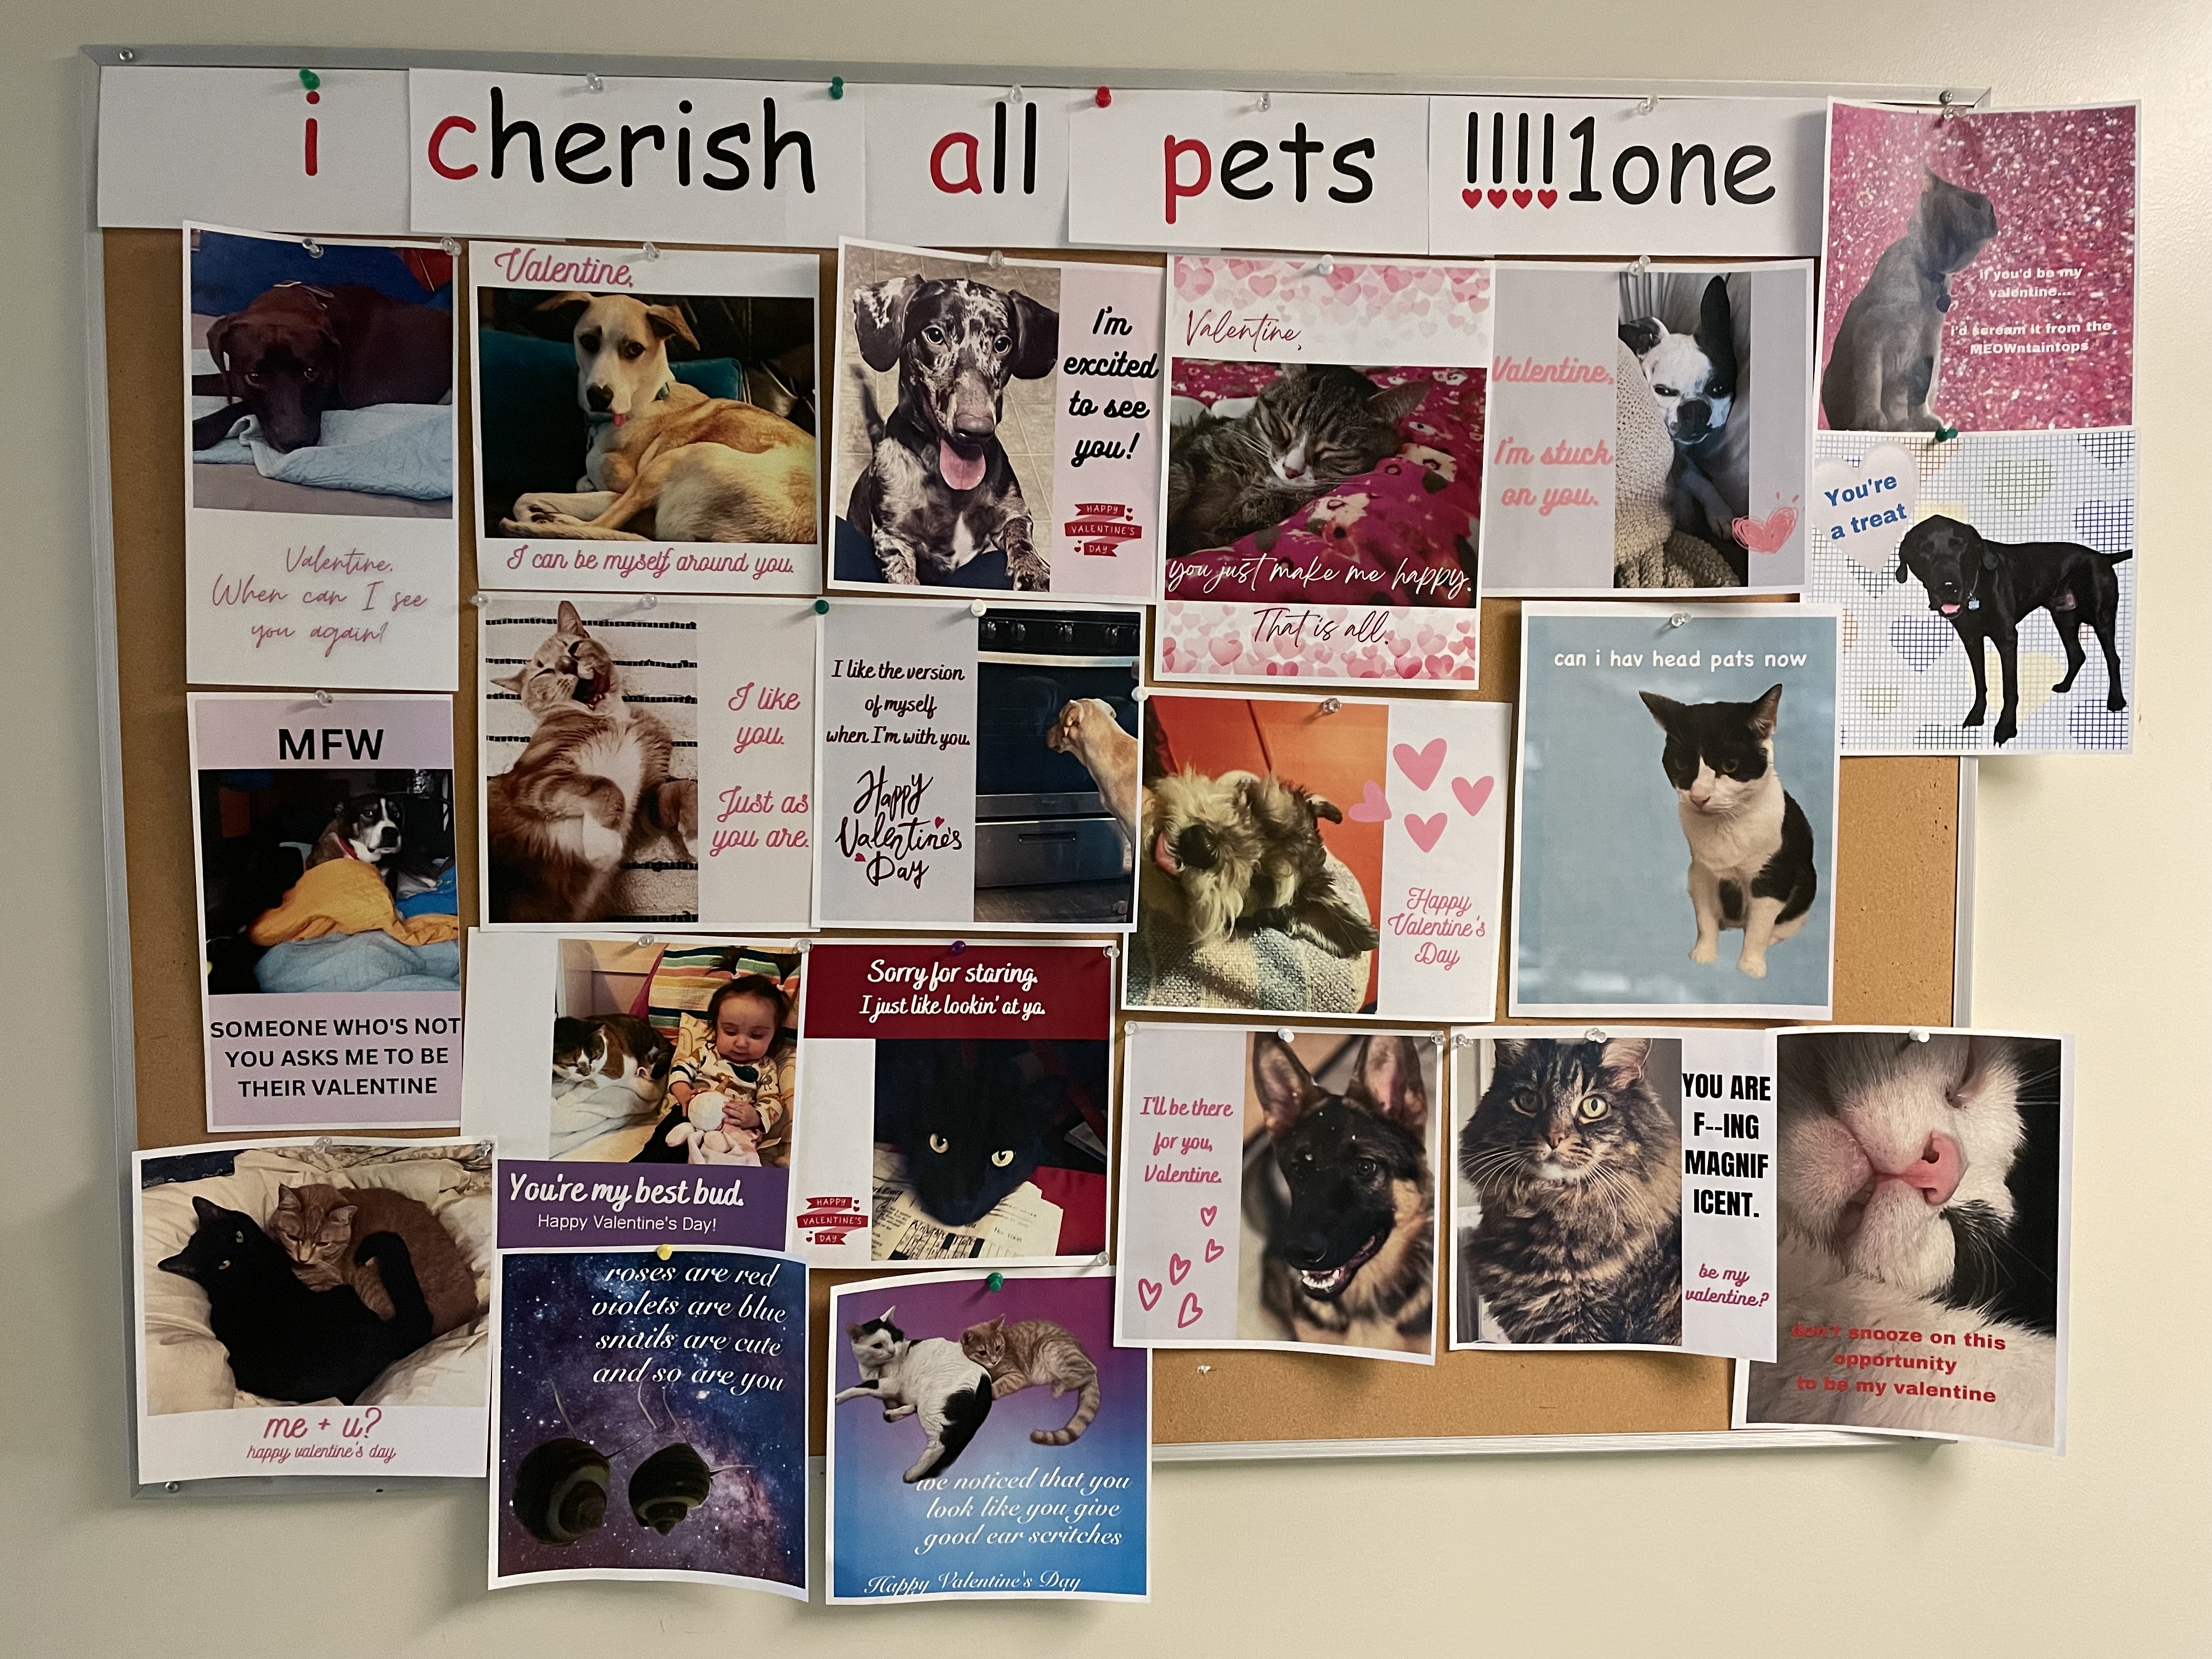 A photo of a bulletin board filled with printed valentines, including those featured above on this page.